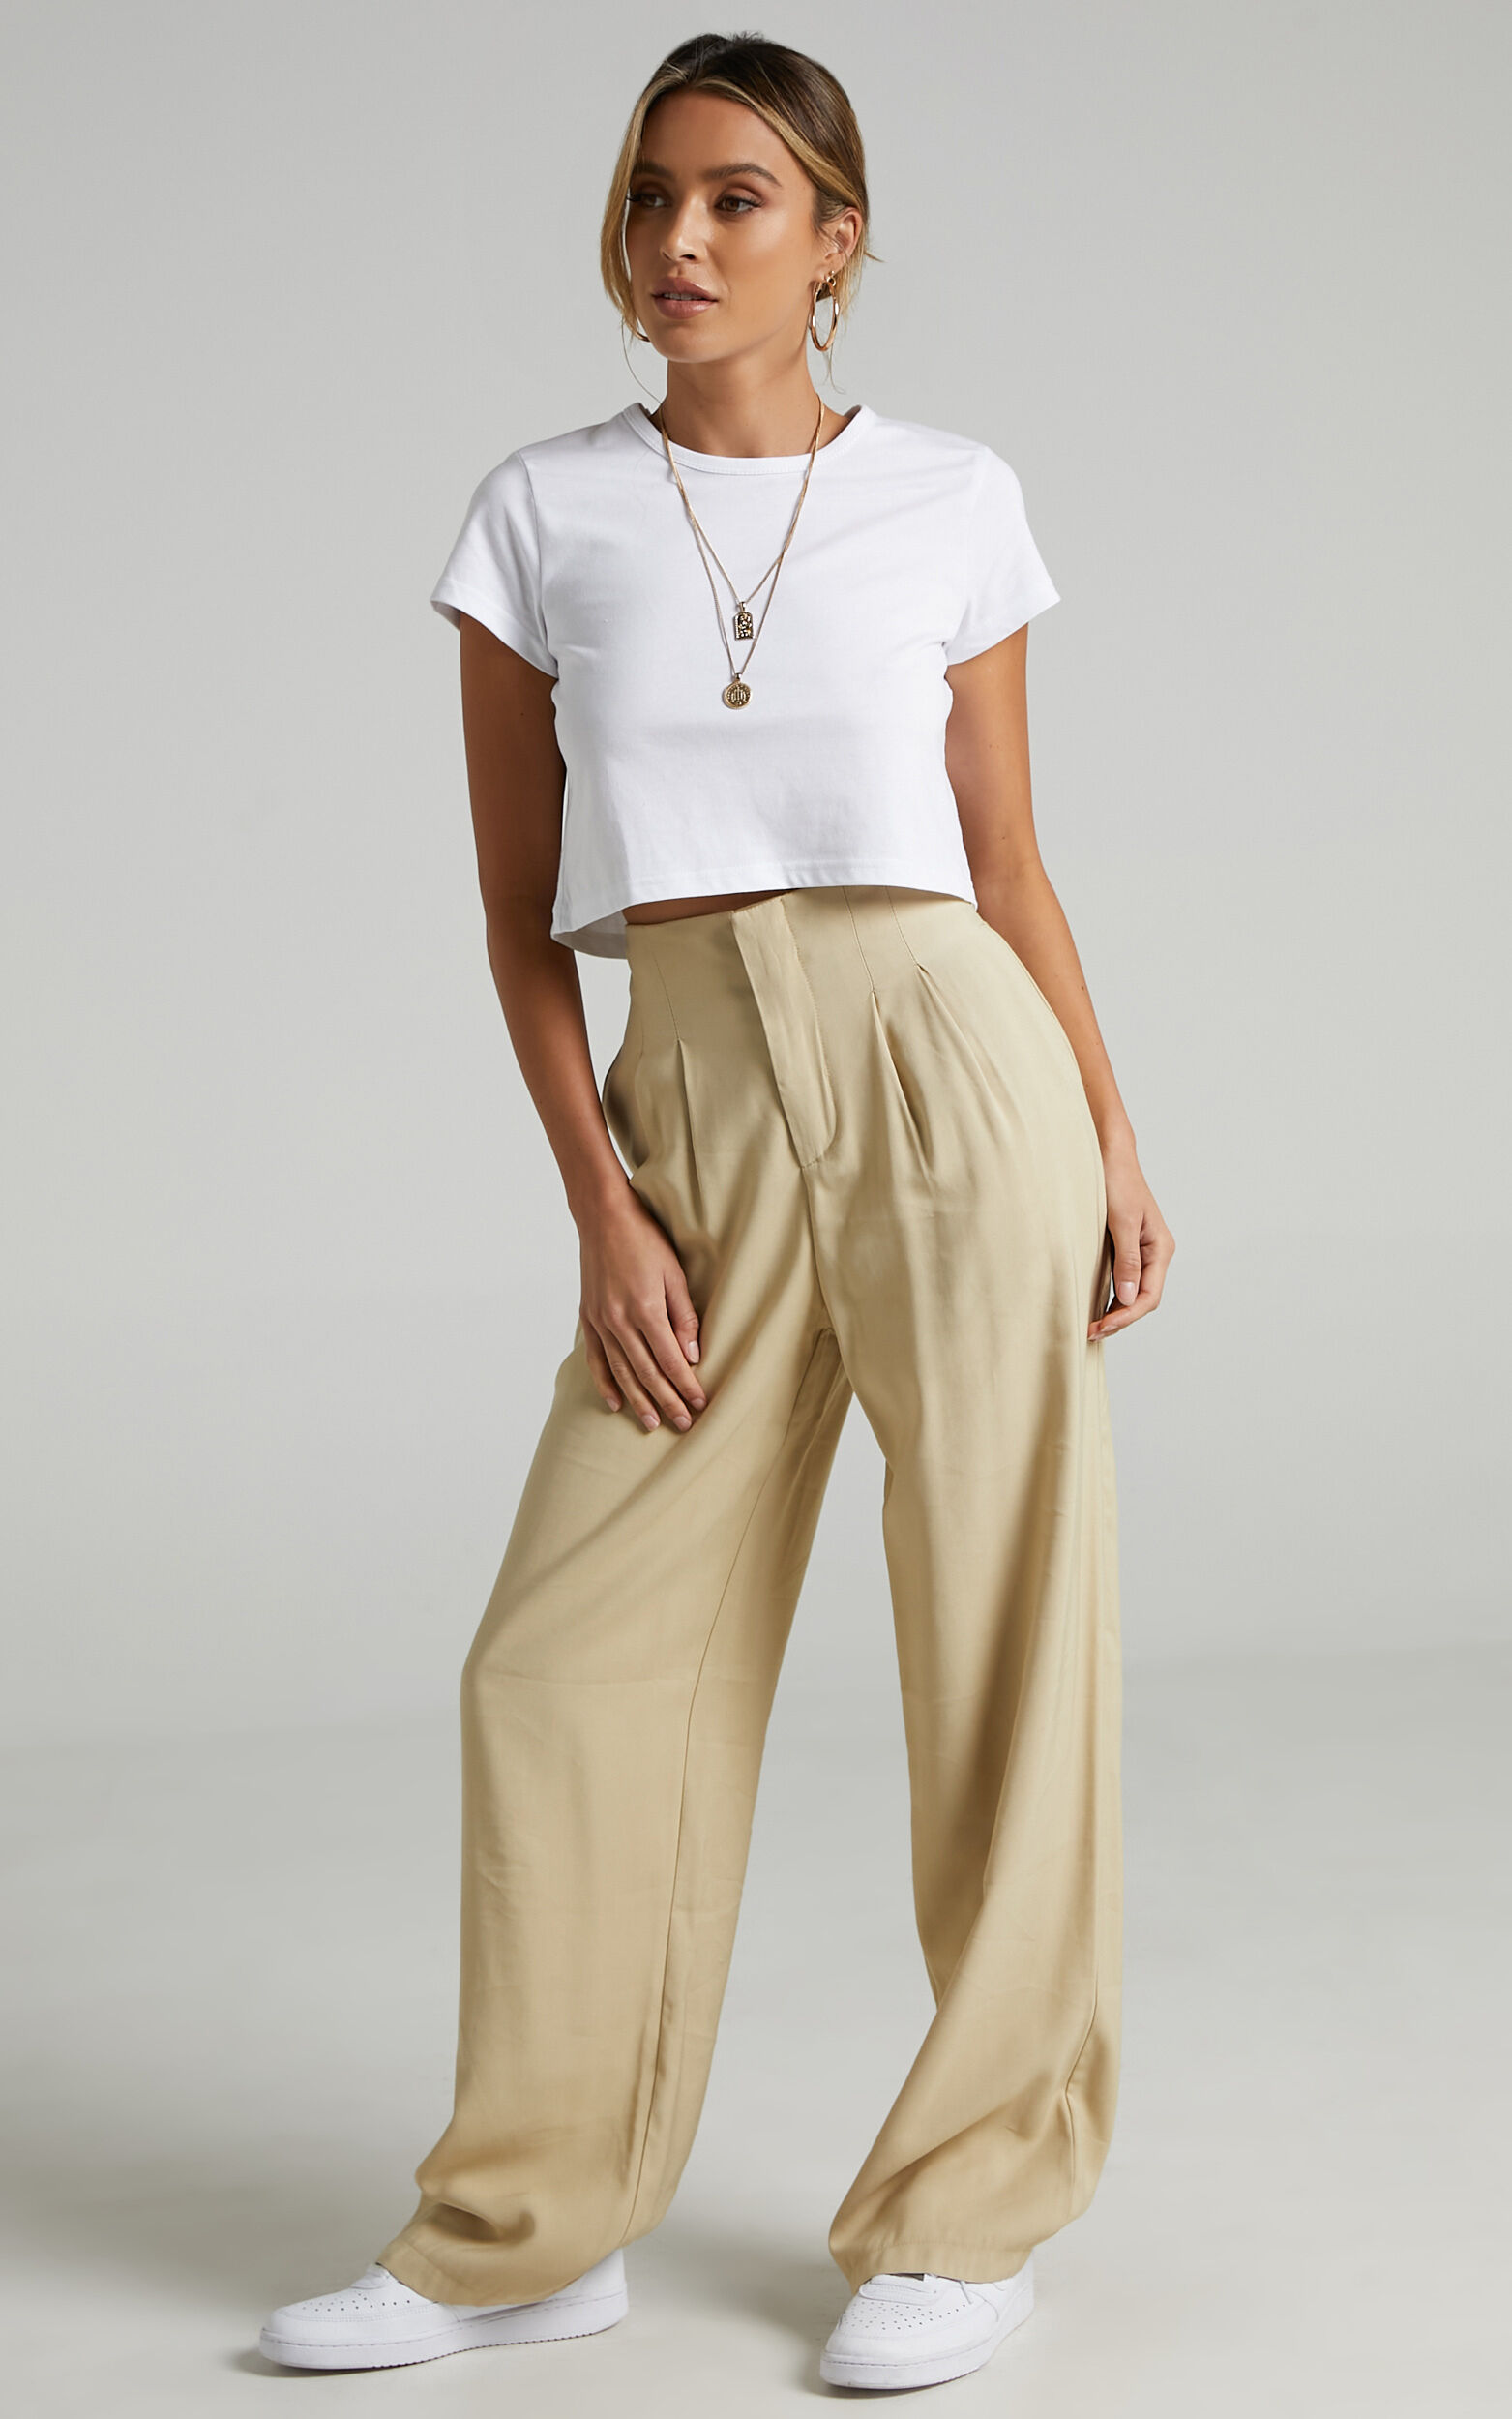 Getting What I Want Crop Top In White | Showpo USA